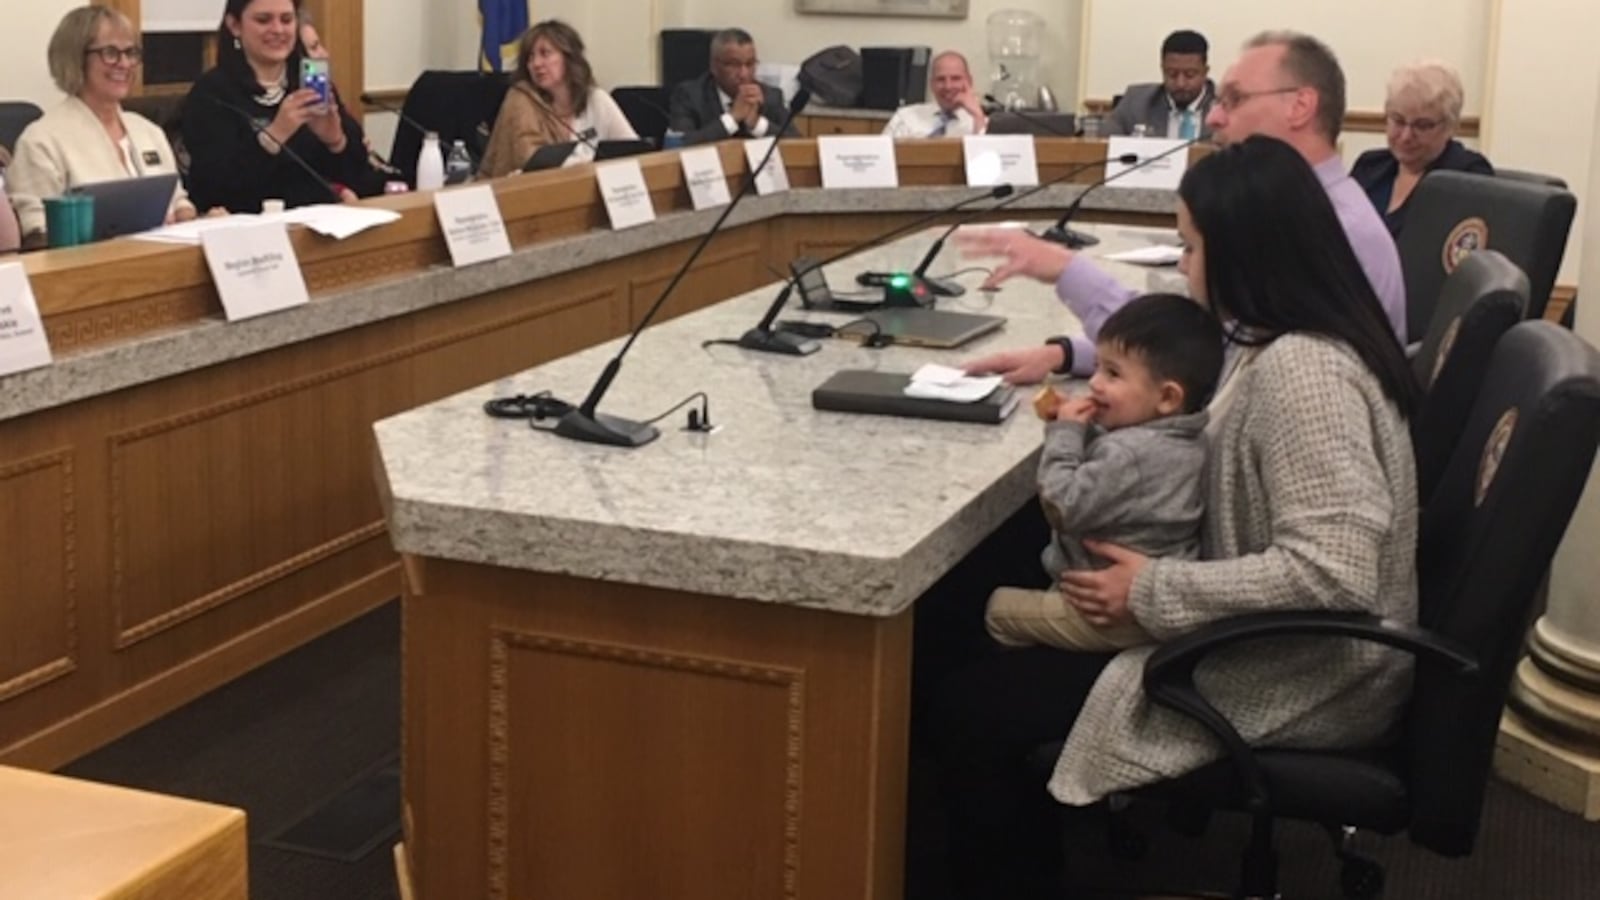 Sabrina Suarez brought her son to advocate for her charter school, which serves young parents and their children.